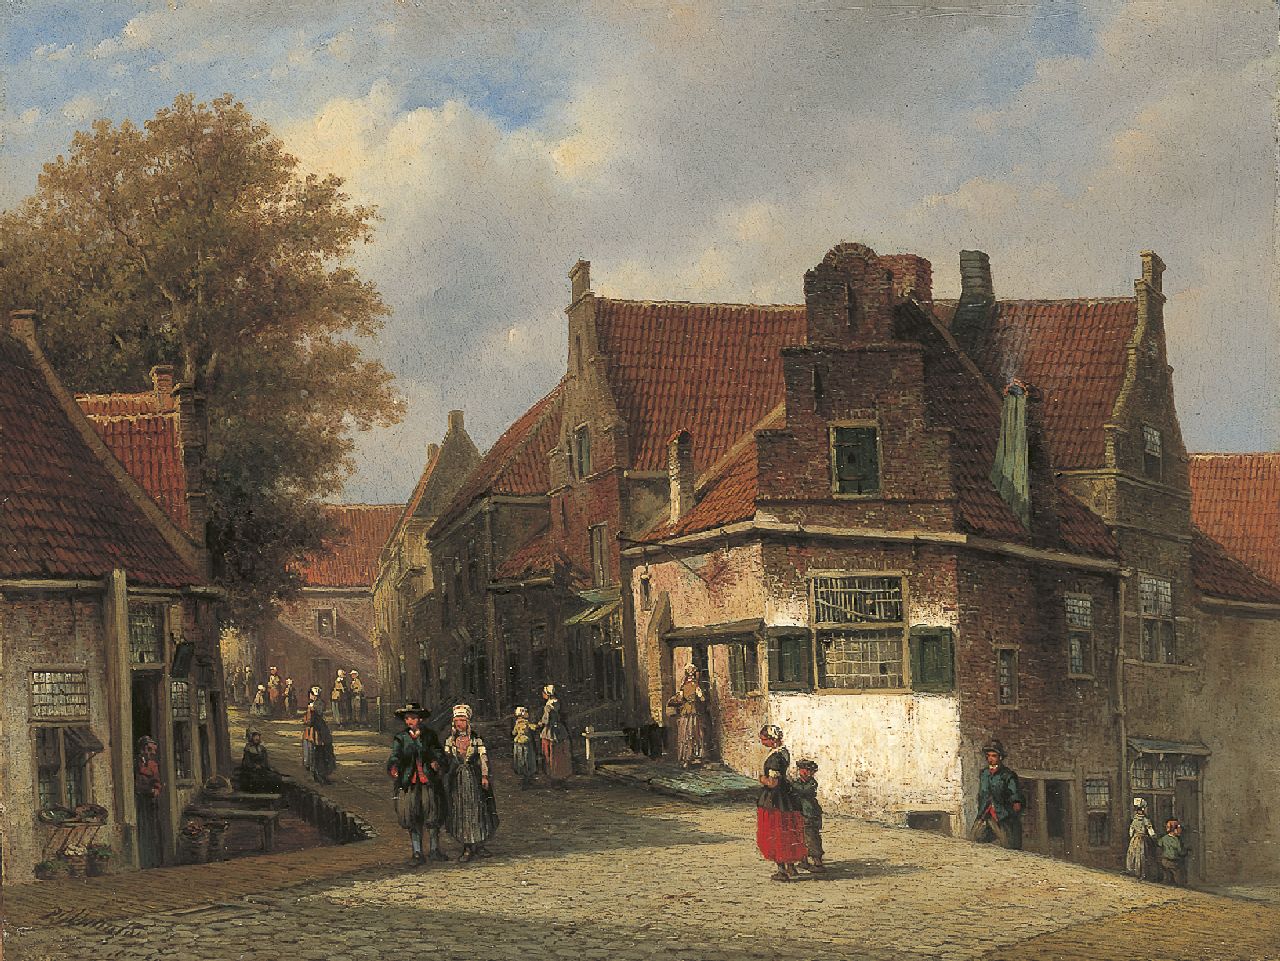 Vertin P.G.  | Petrus Gerardus Vertin, A sunlit street with a woman from Marken in a regional costume, Öl auf Holz 31,2 x 41,2 cm, signed l.l. und dated '51